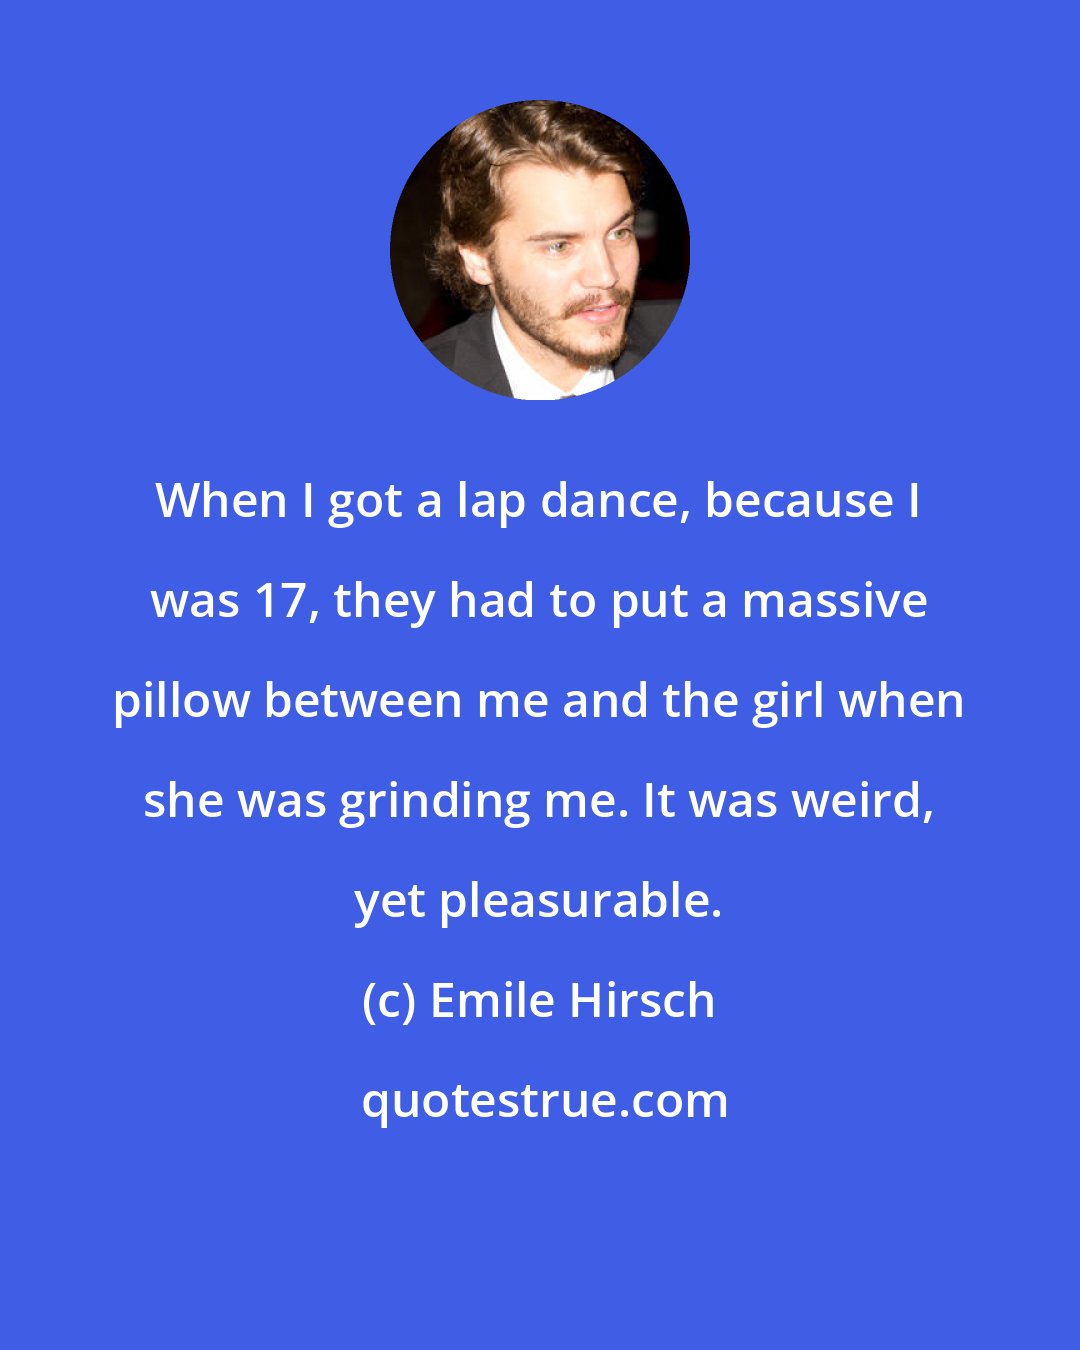 Emile Hirsch: When I got a lap dance, because I was 17, they had to put a massive pillow between me and the girl when she was grinding me. It was weird, yet pleasurable.